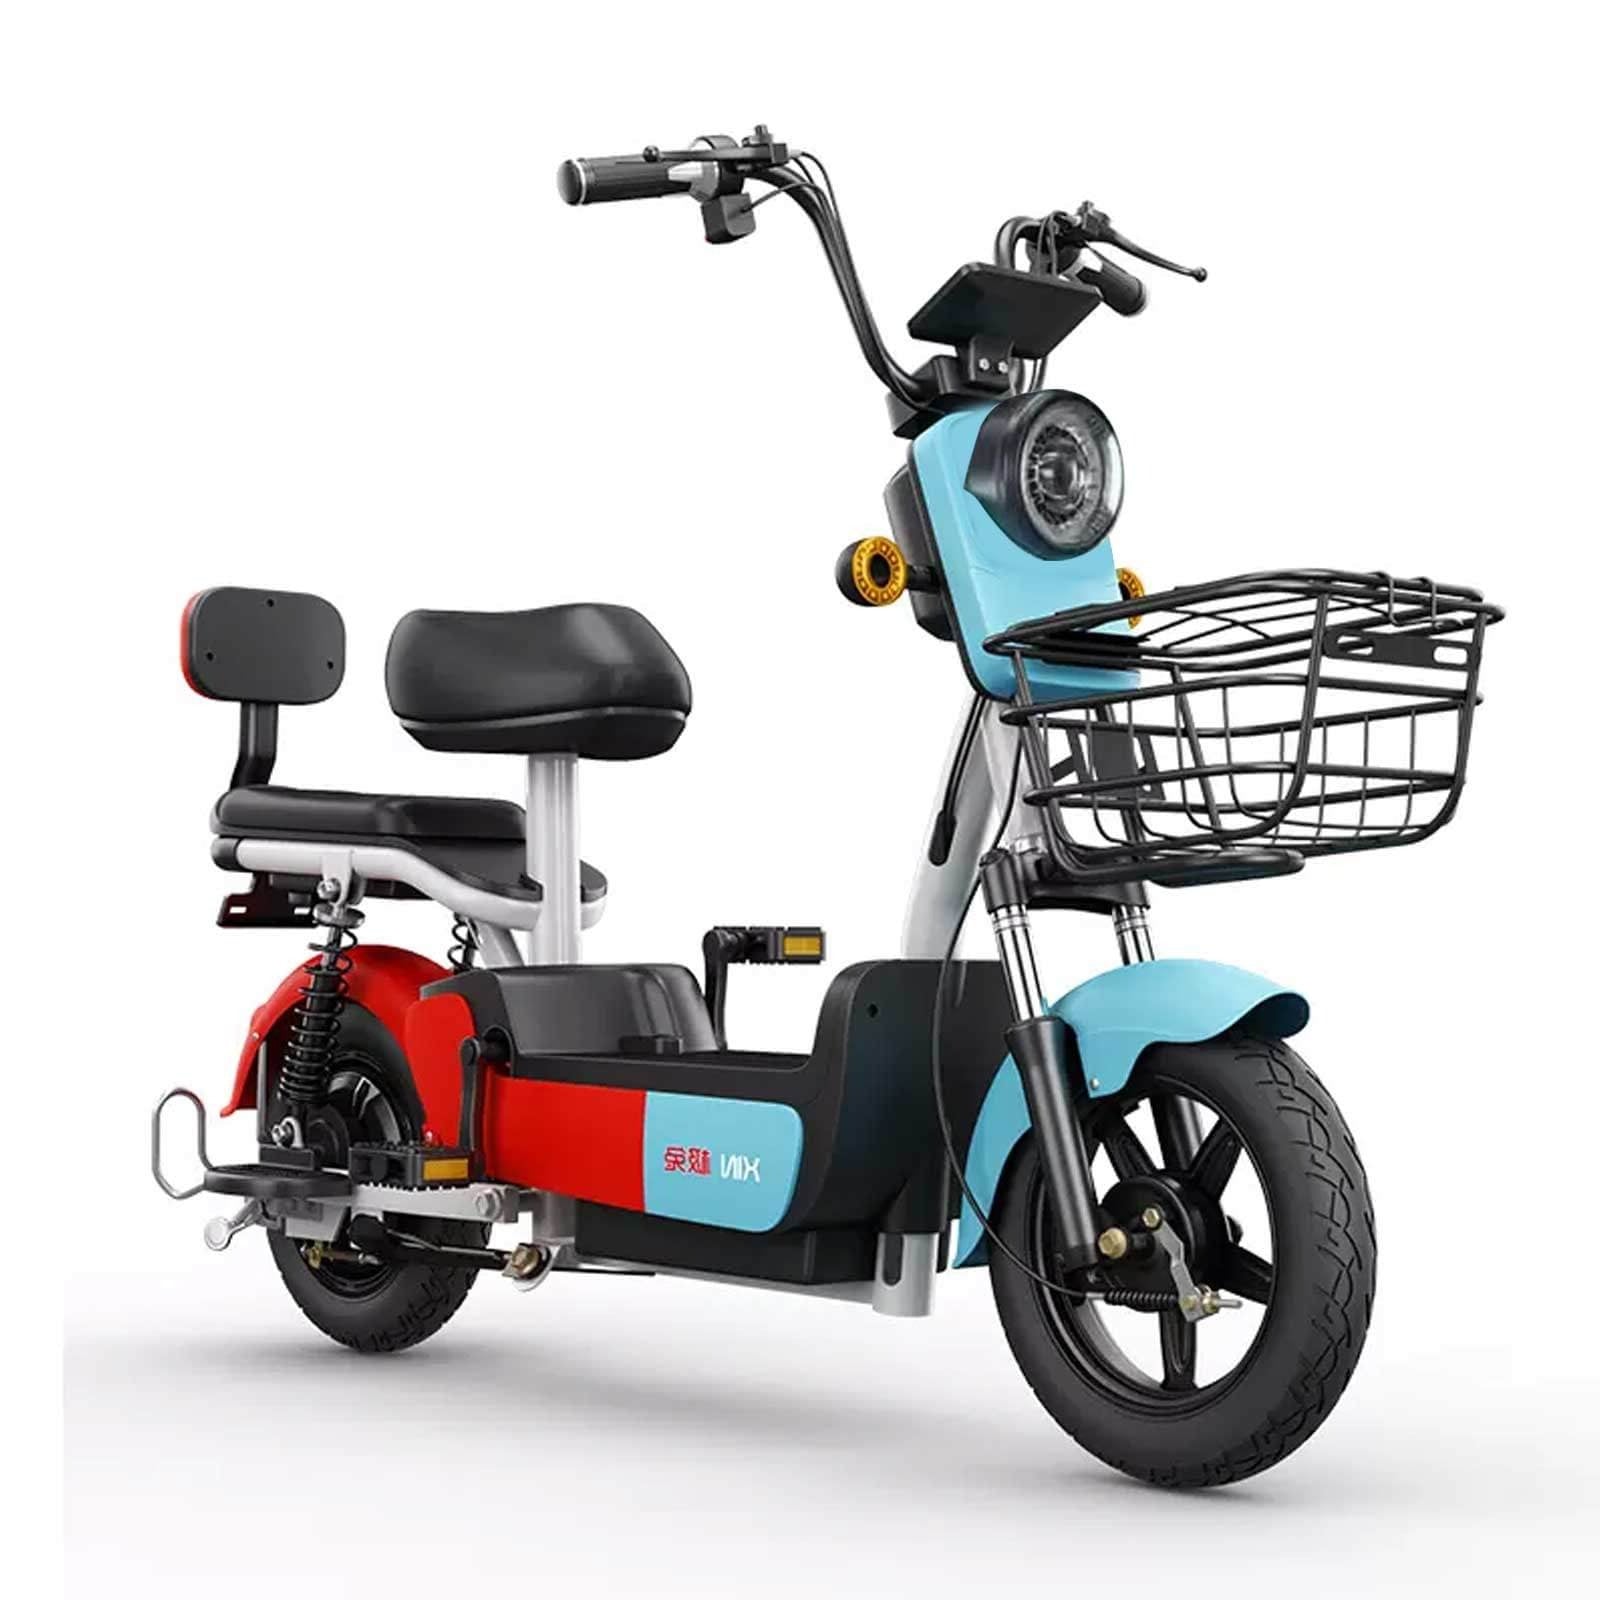 Electric moped 2 seater scooter